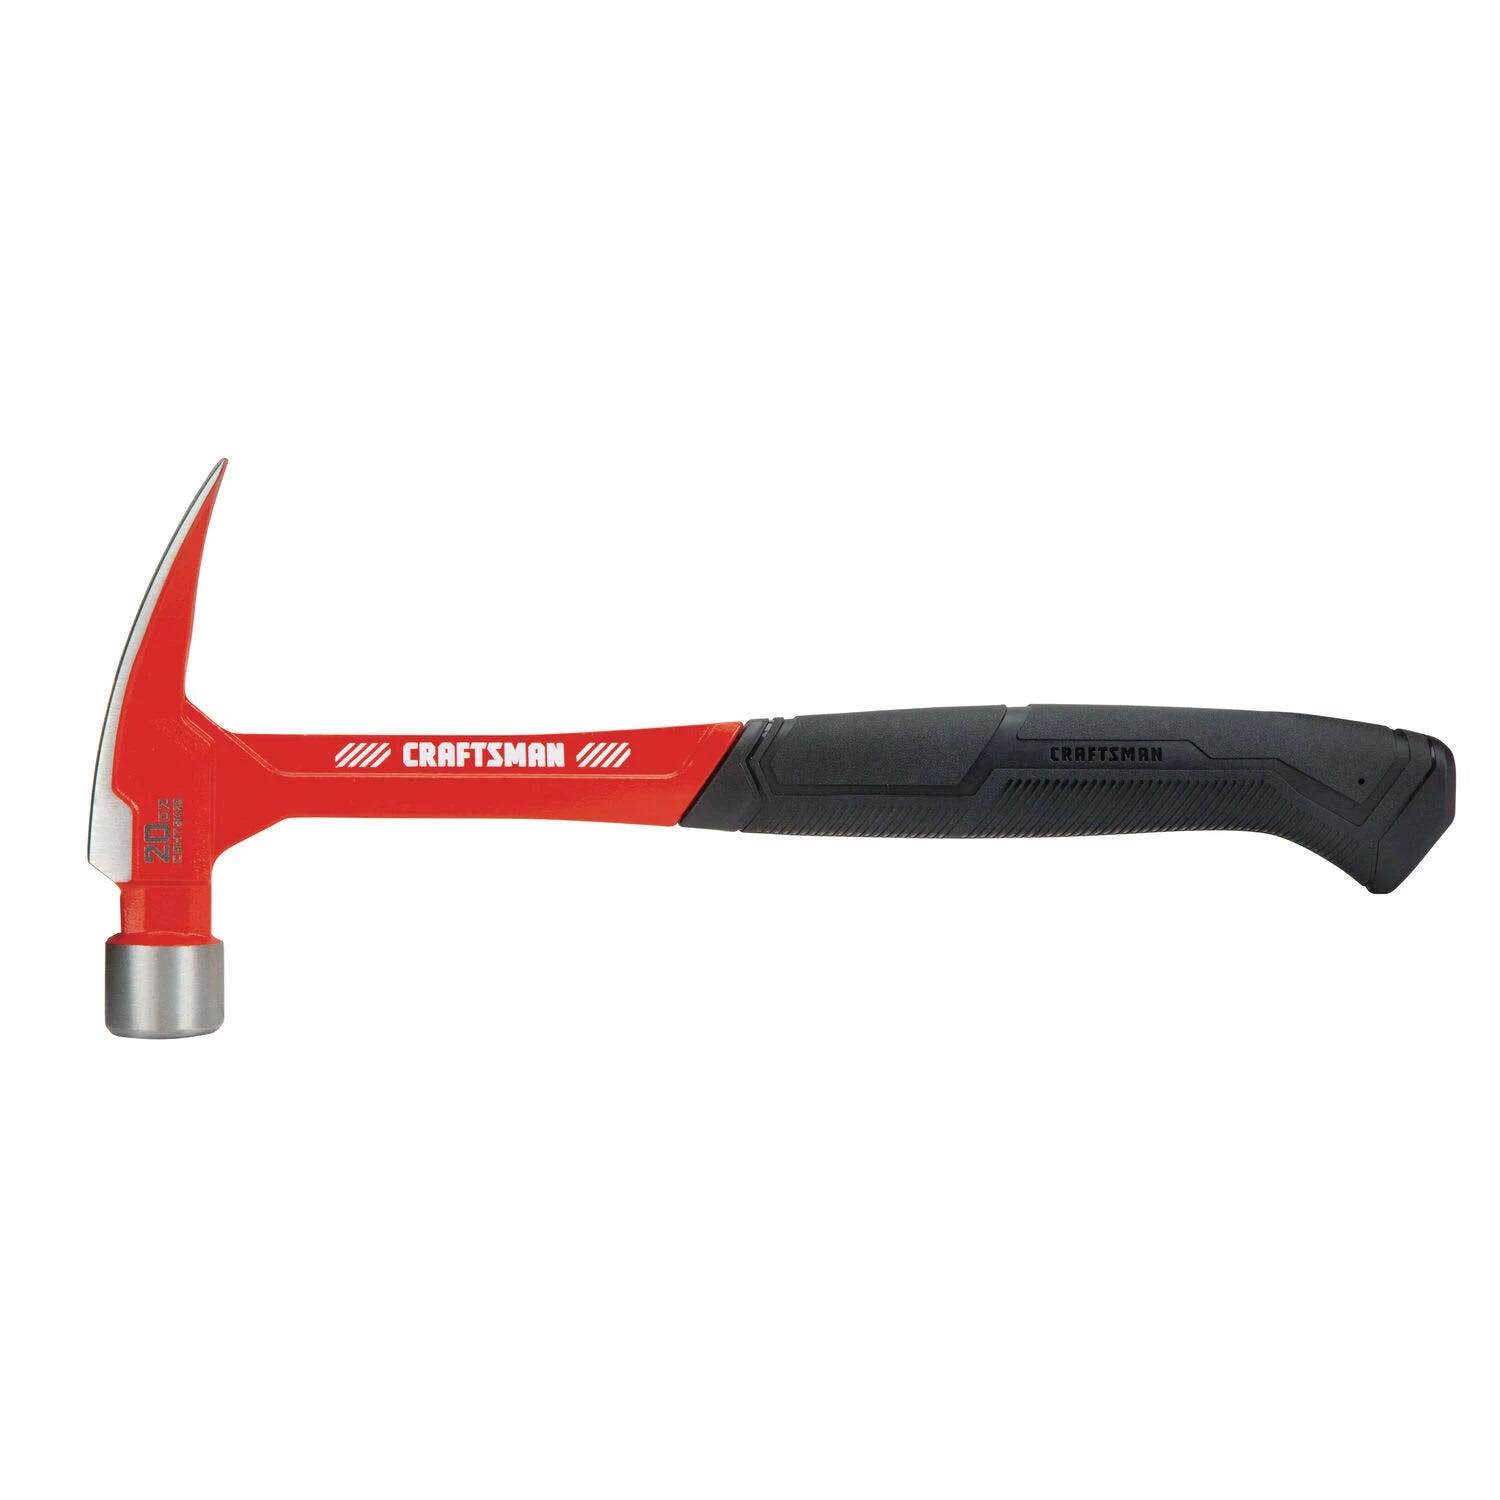 Vibration-Reduction Framing Hammer with Ergonomic Grip and Smooth Face | Image